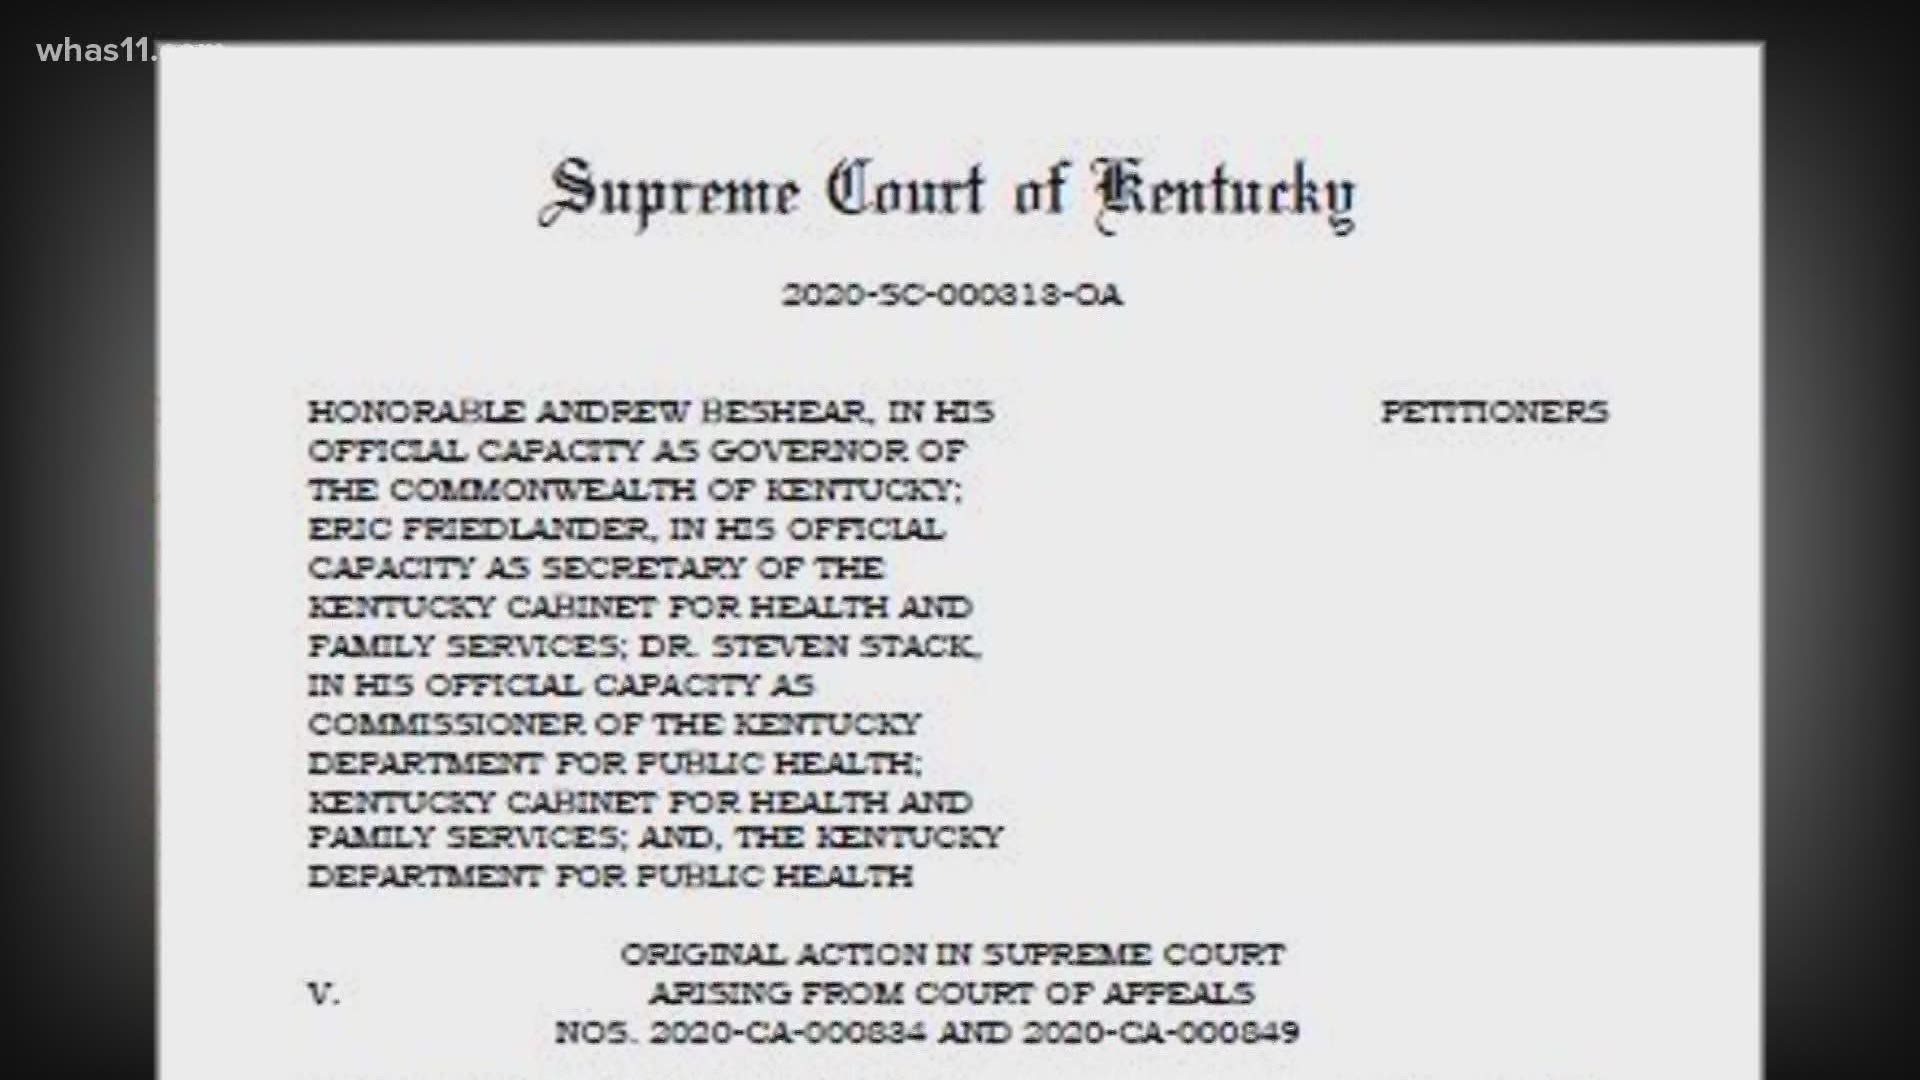 The Kentucky Supreme Court decided all of the governor's coronavirus executive orders will stay in place for now.